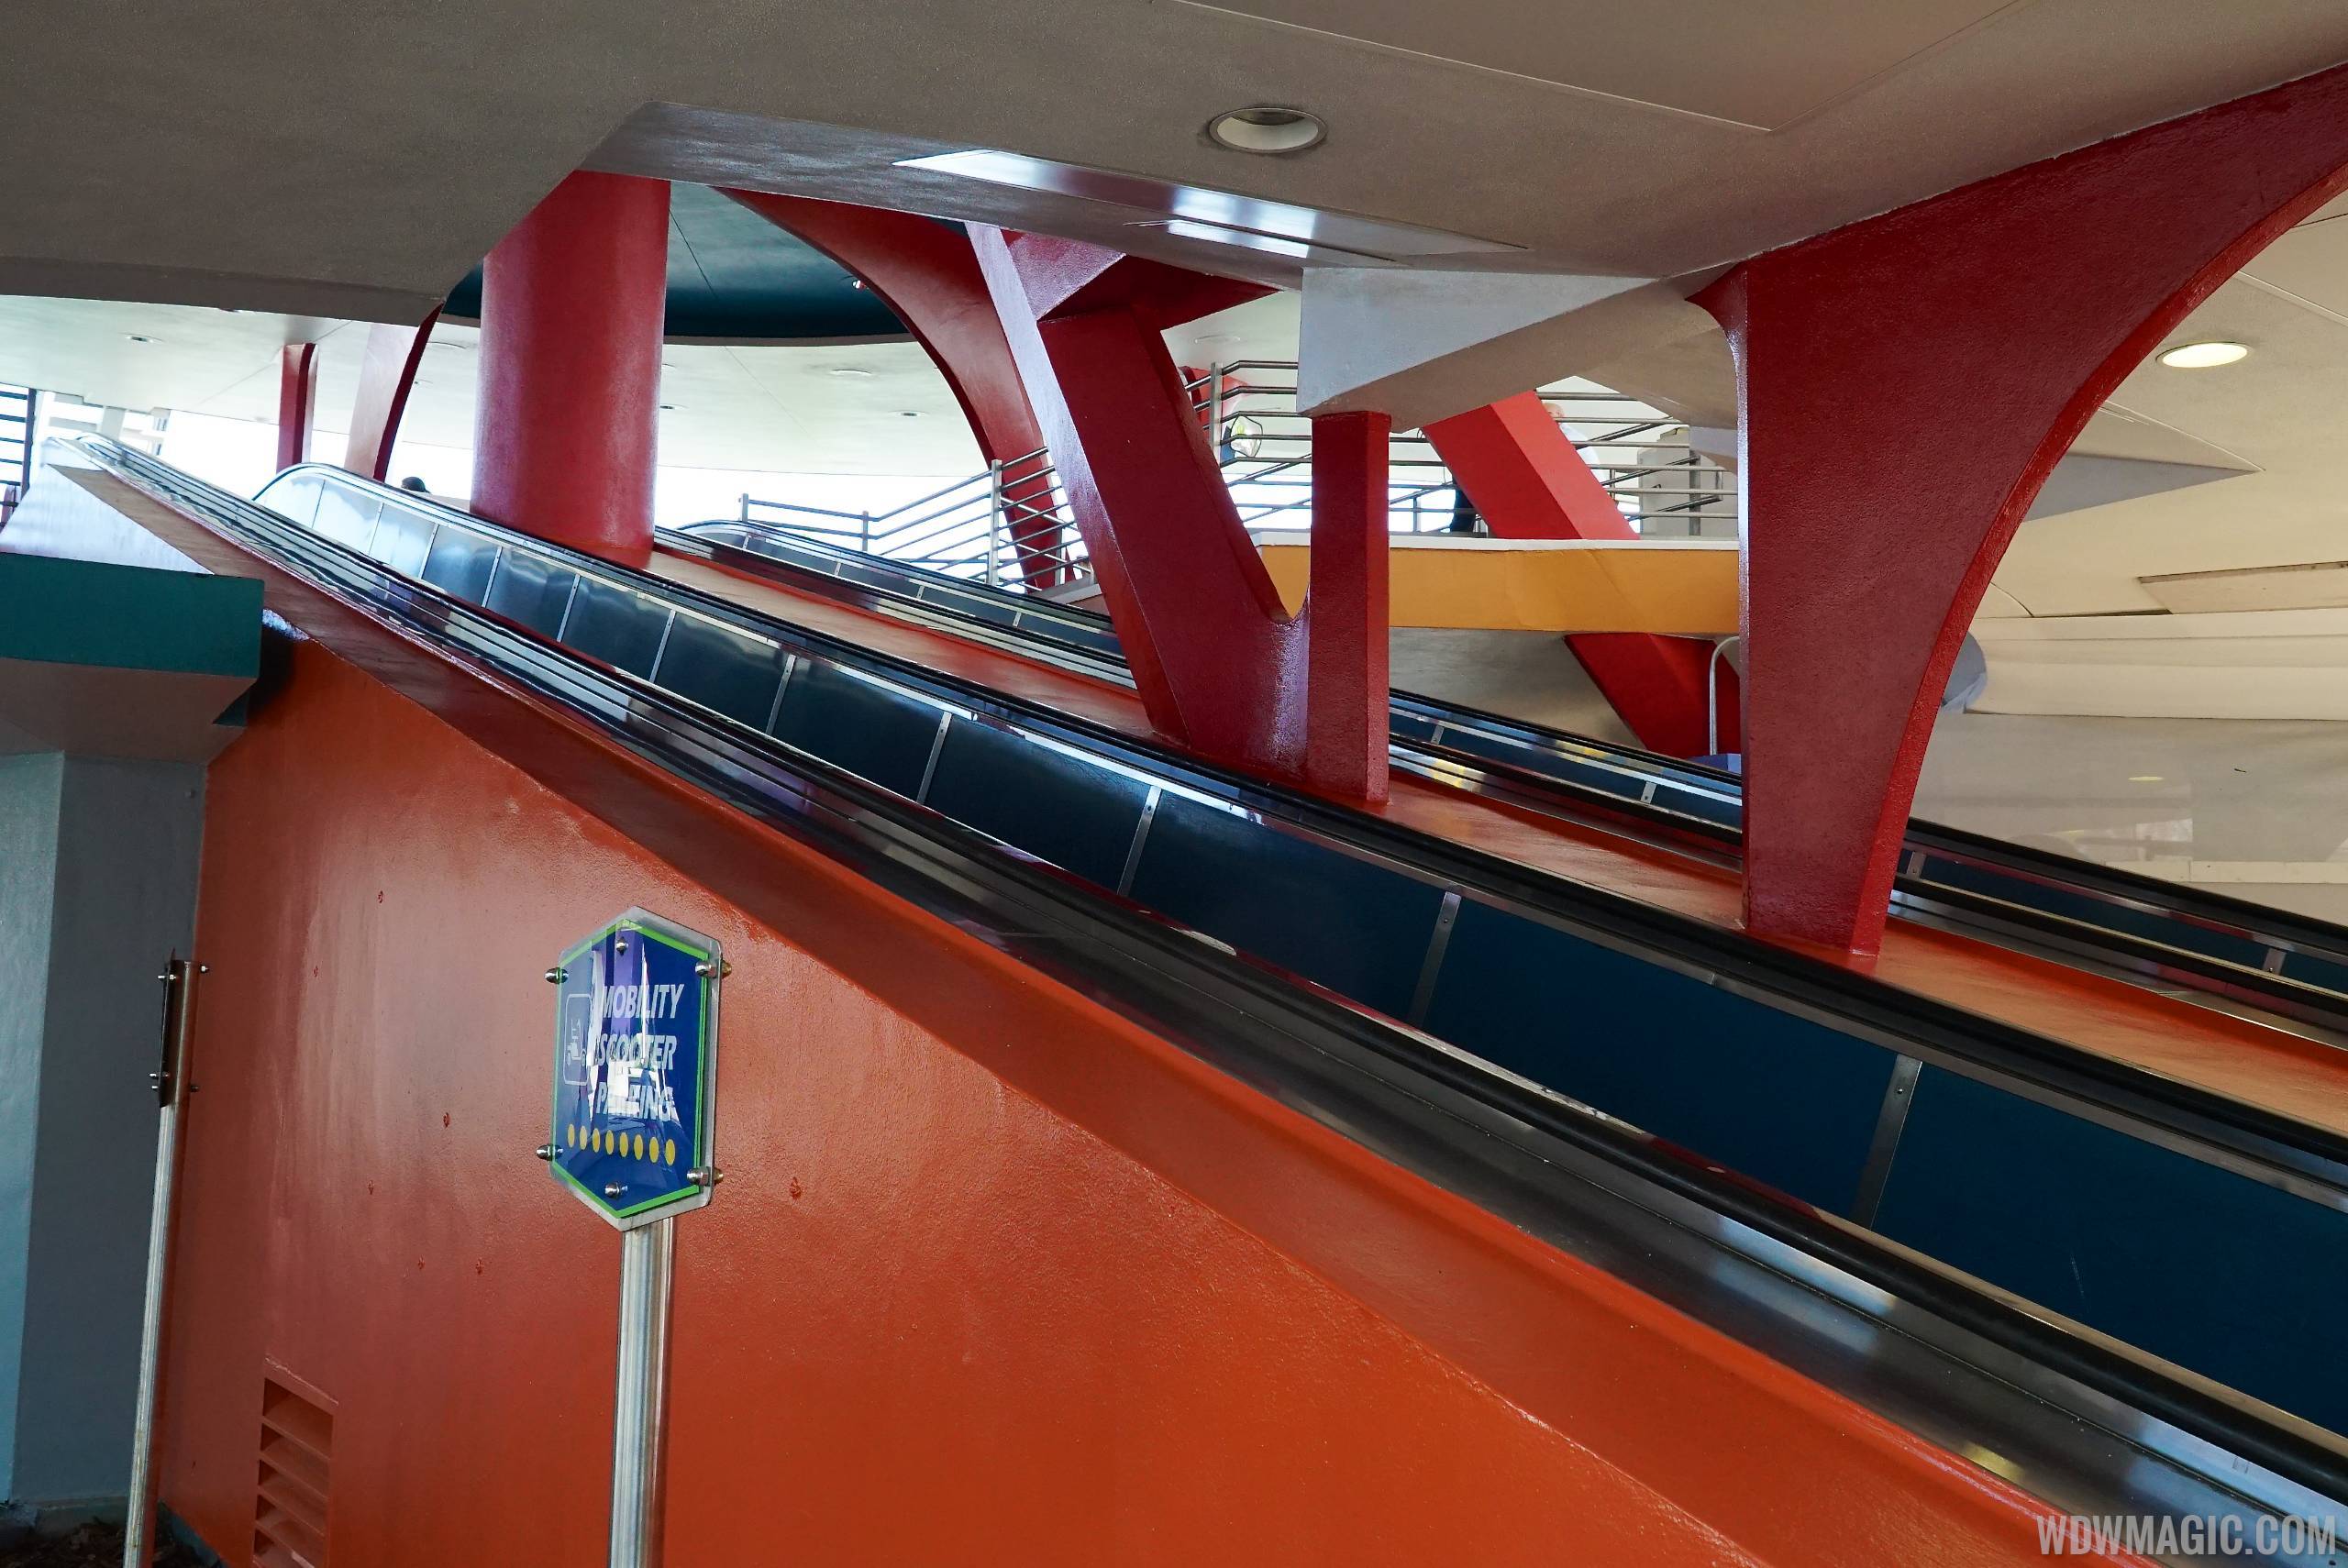 Tomorrowland Transit Authority PeopleMover new color scheme